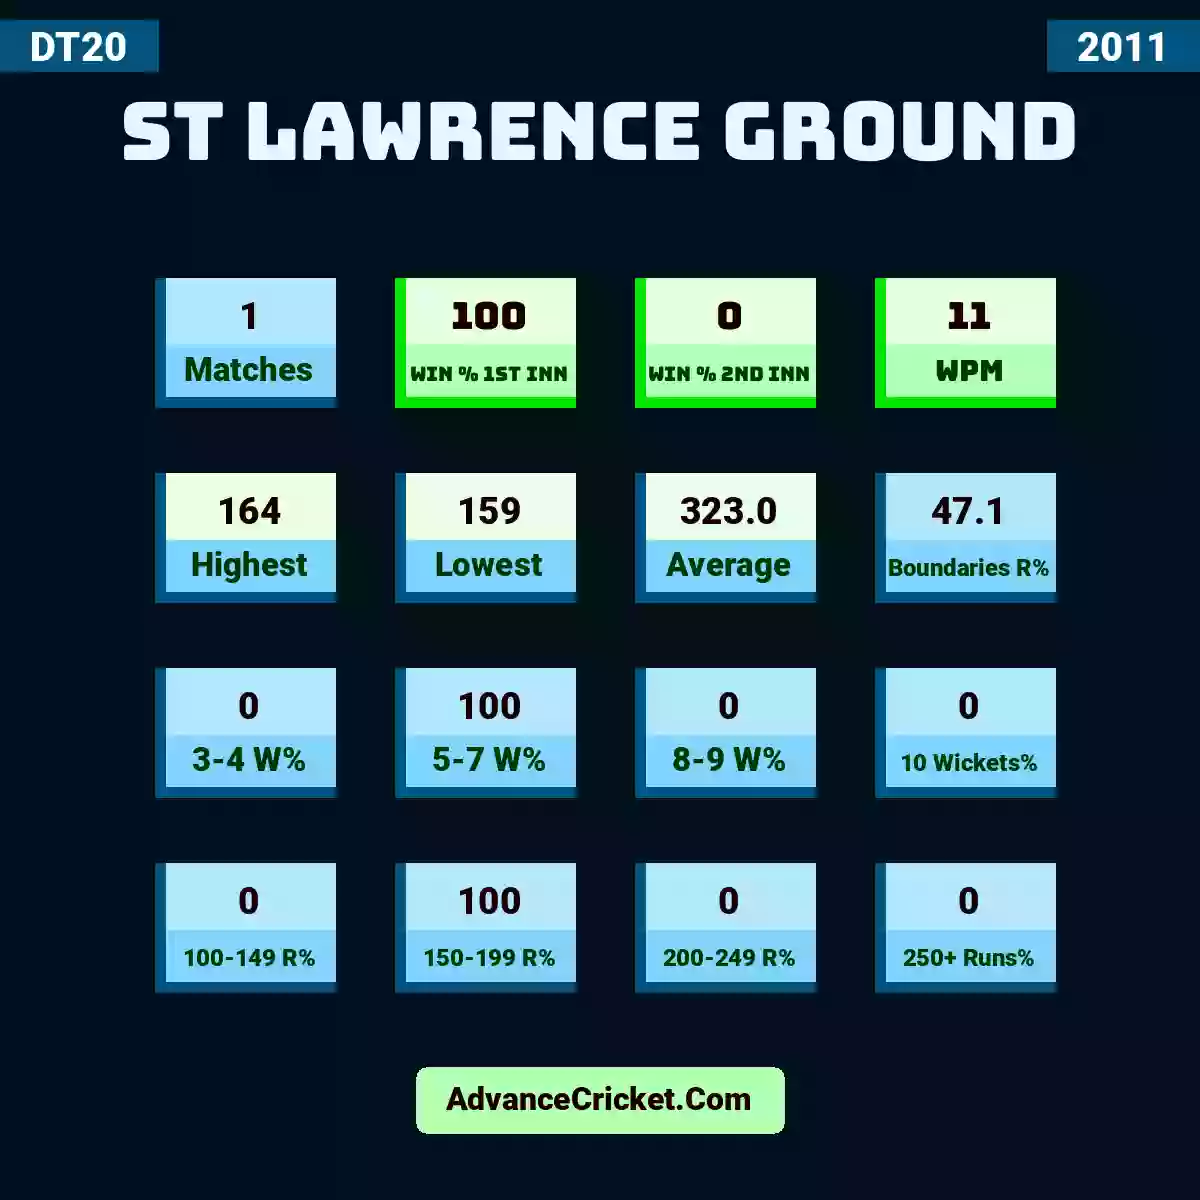 Image showing St Lawrence Ground with Matches: 1, Win % 1st Inn: 100, Win % 2nd Inn: 0, WPM: 11, Highest: 164, Lowest: 159, Average: 323.0, Boundaries R%: 47.1, 3-4 W%: 0, 5-7 W%: 100, 8-9 W%: 0, 10 Wickets%: 0, 100-149 R%: 0, 150-199 R%: 100, 200-249 R%: 0, 250+ Runs%: 0.